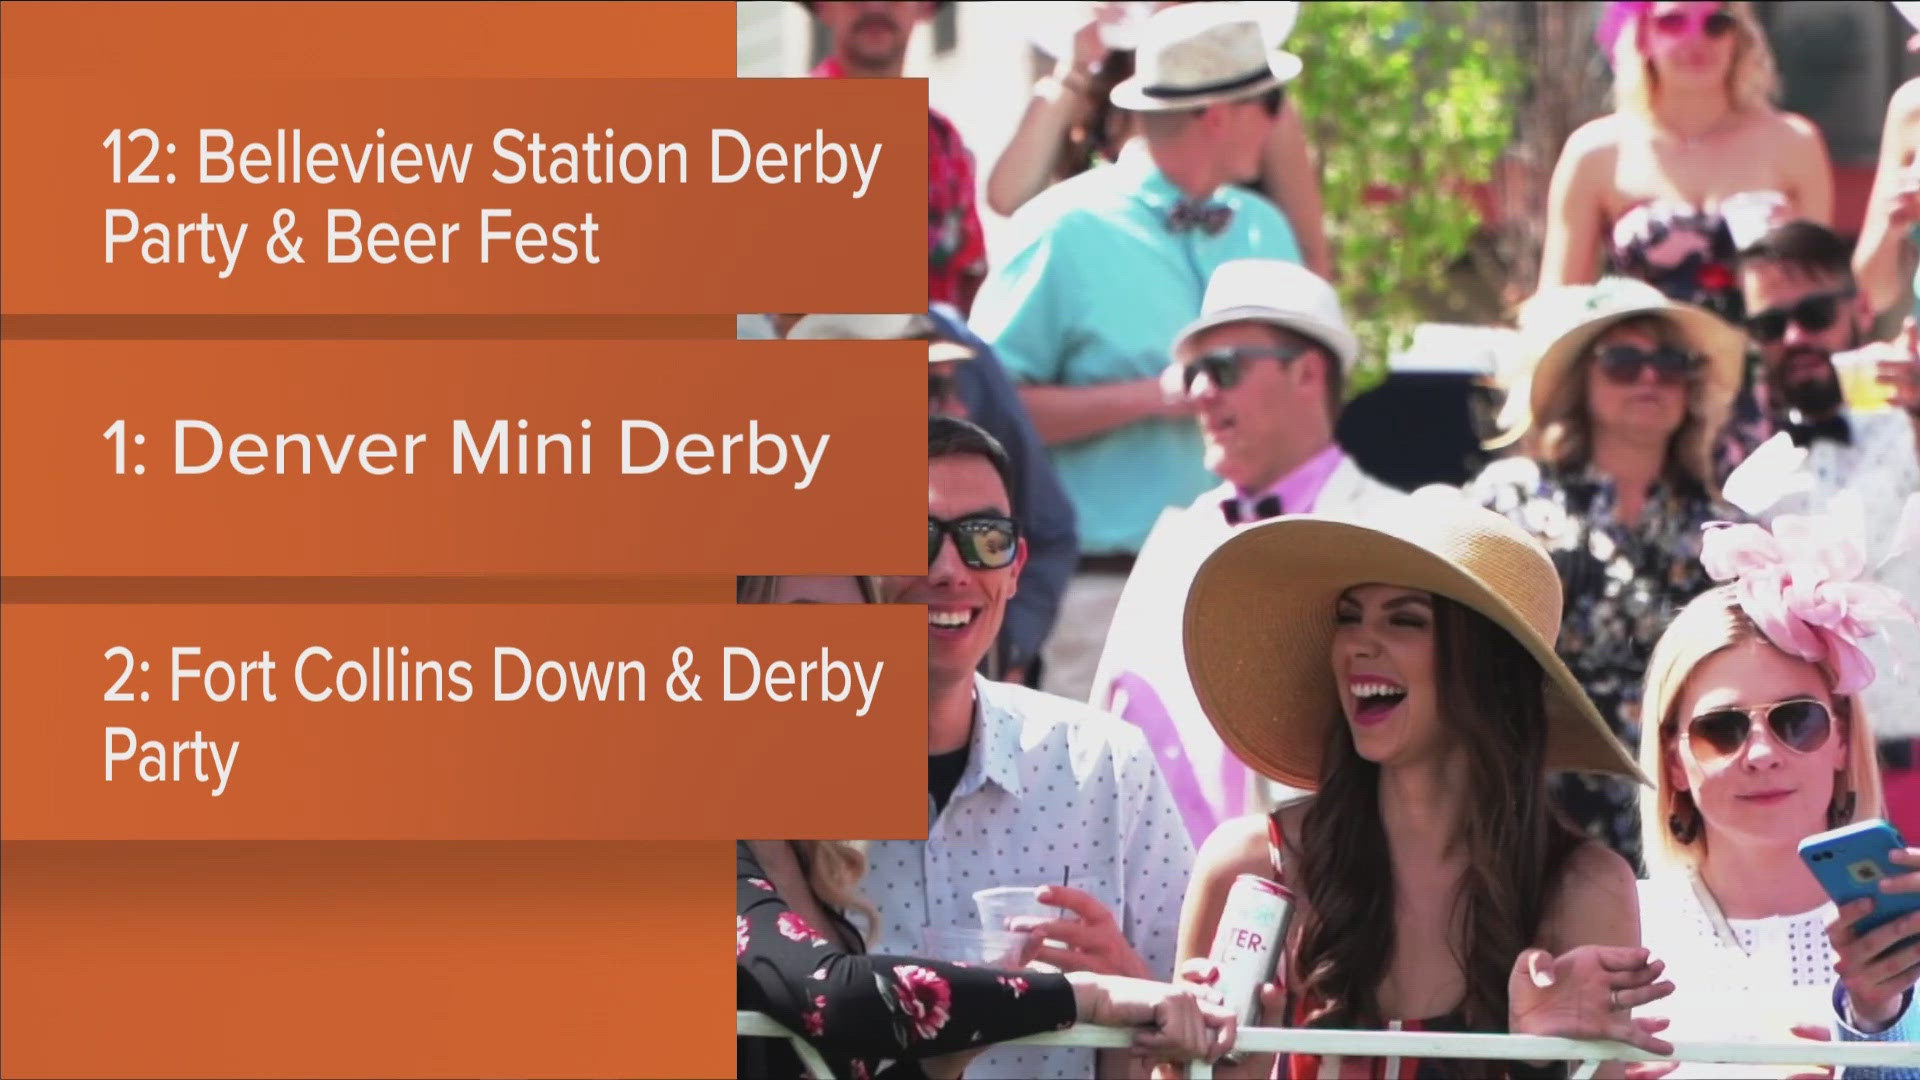 Belleview Station is hosting its 10th annual Derby Party and Beer Fest on Saturday featuring more than 70 local craft beer vendors.